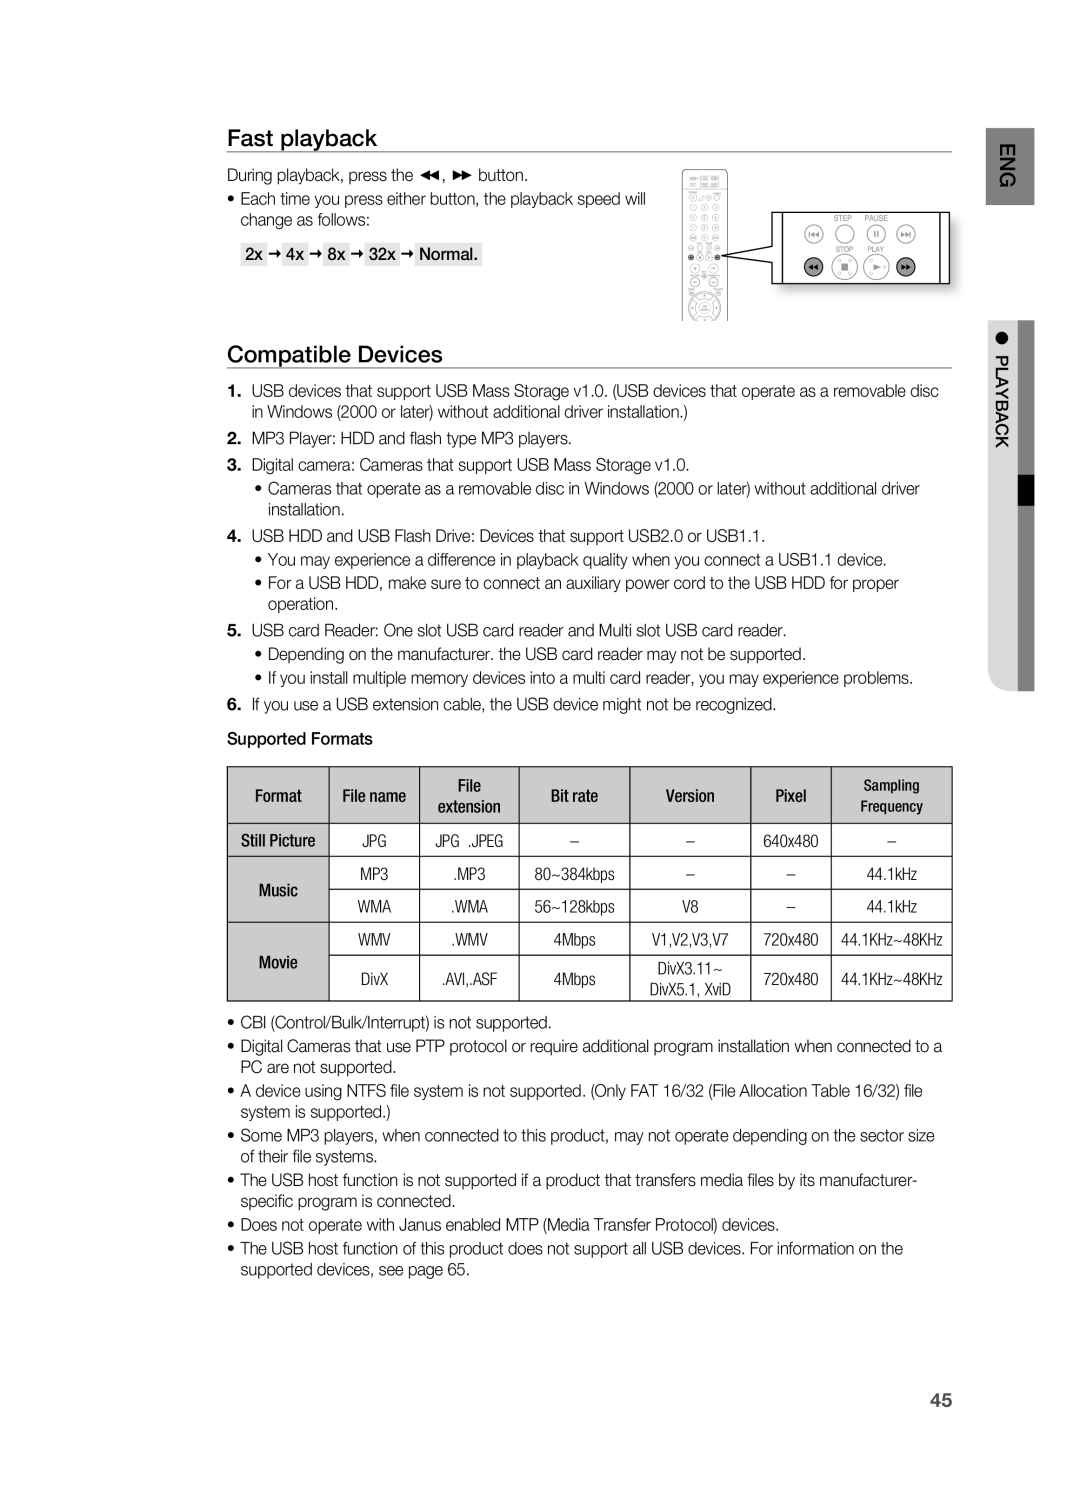 Samsung HT-TX715 user manual Fast playback, Compatible Devices 